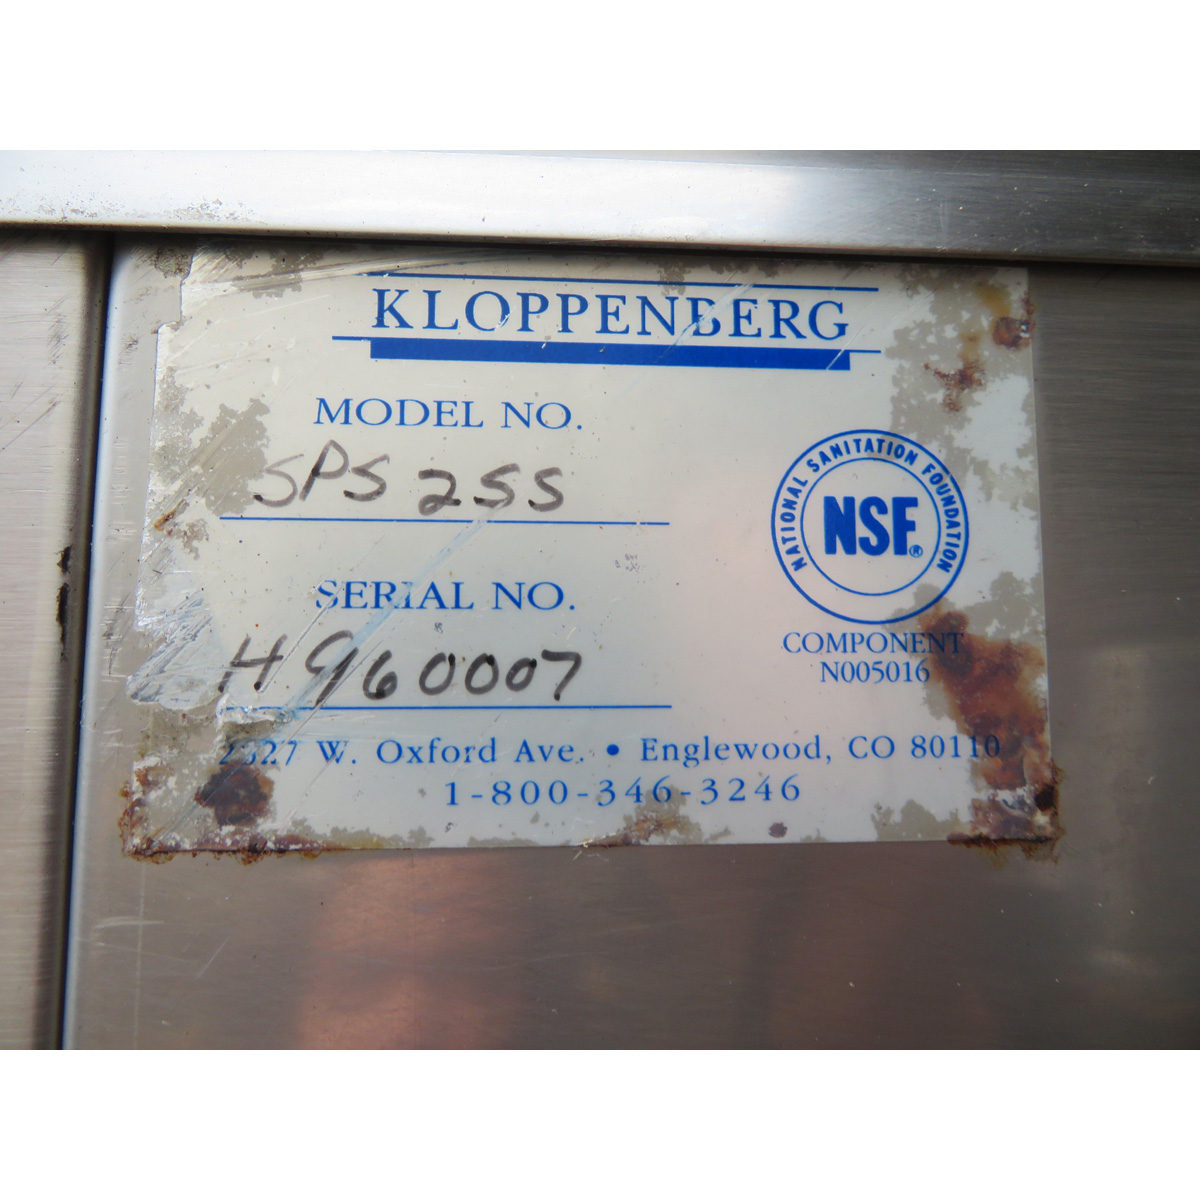 Howe 2000RL 1 Ton Ice Flaker on Kloppenberg Bin System, Used Excellent Condition image 8